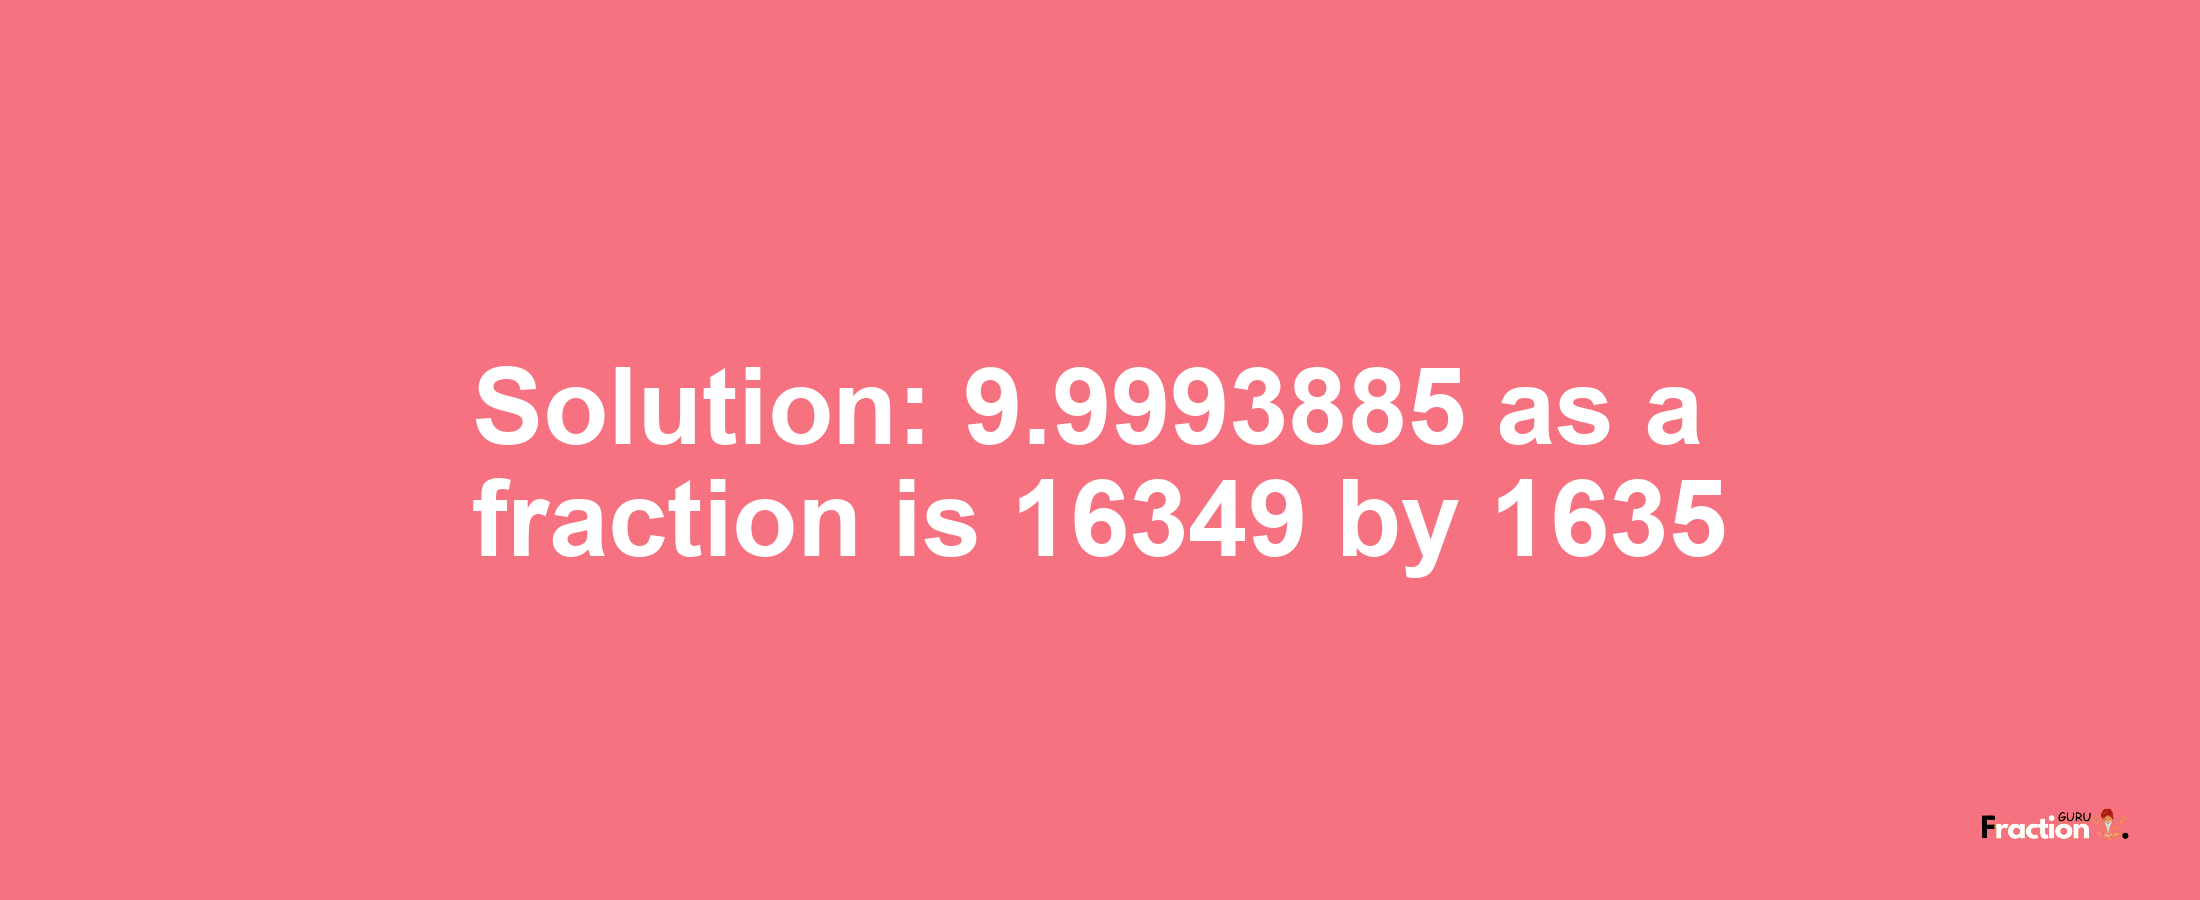 Solution:9.9993885 as a fraction is 16349/1635